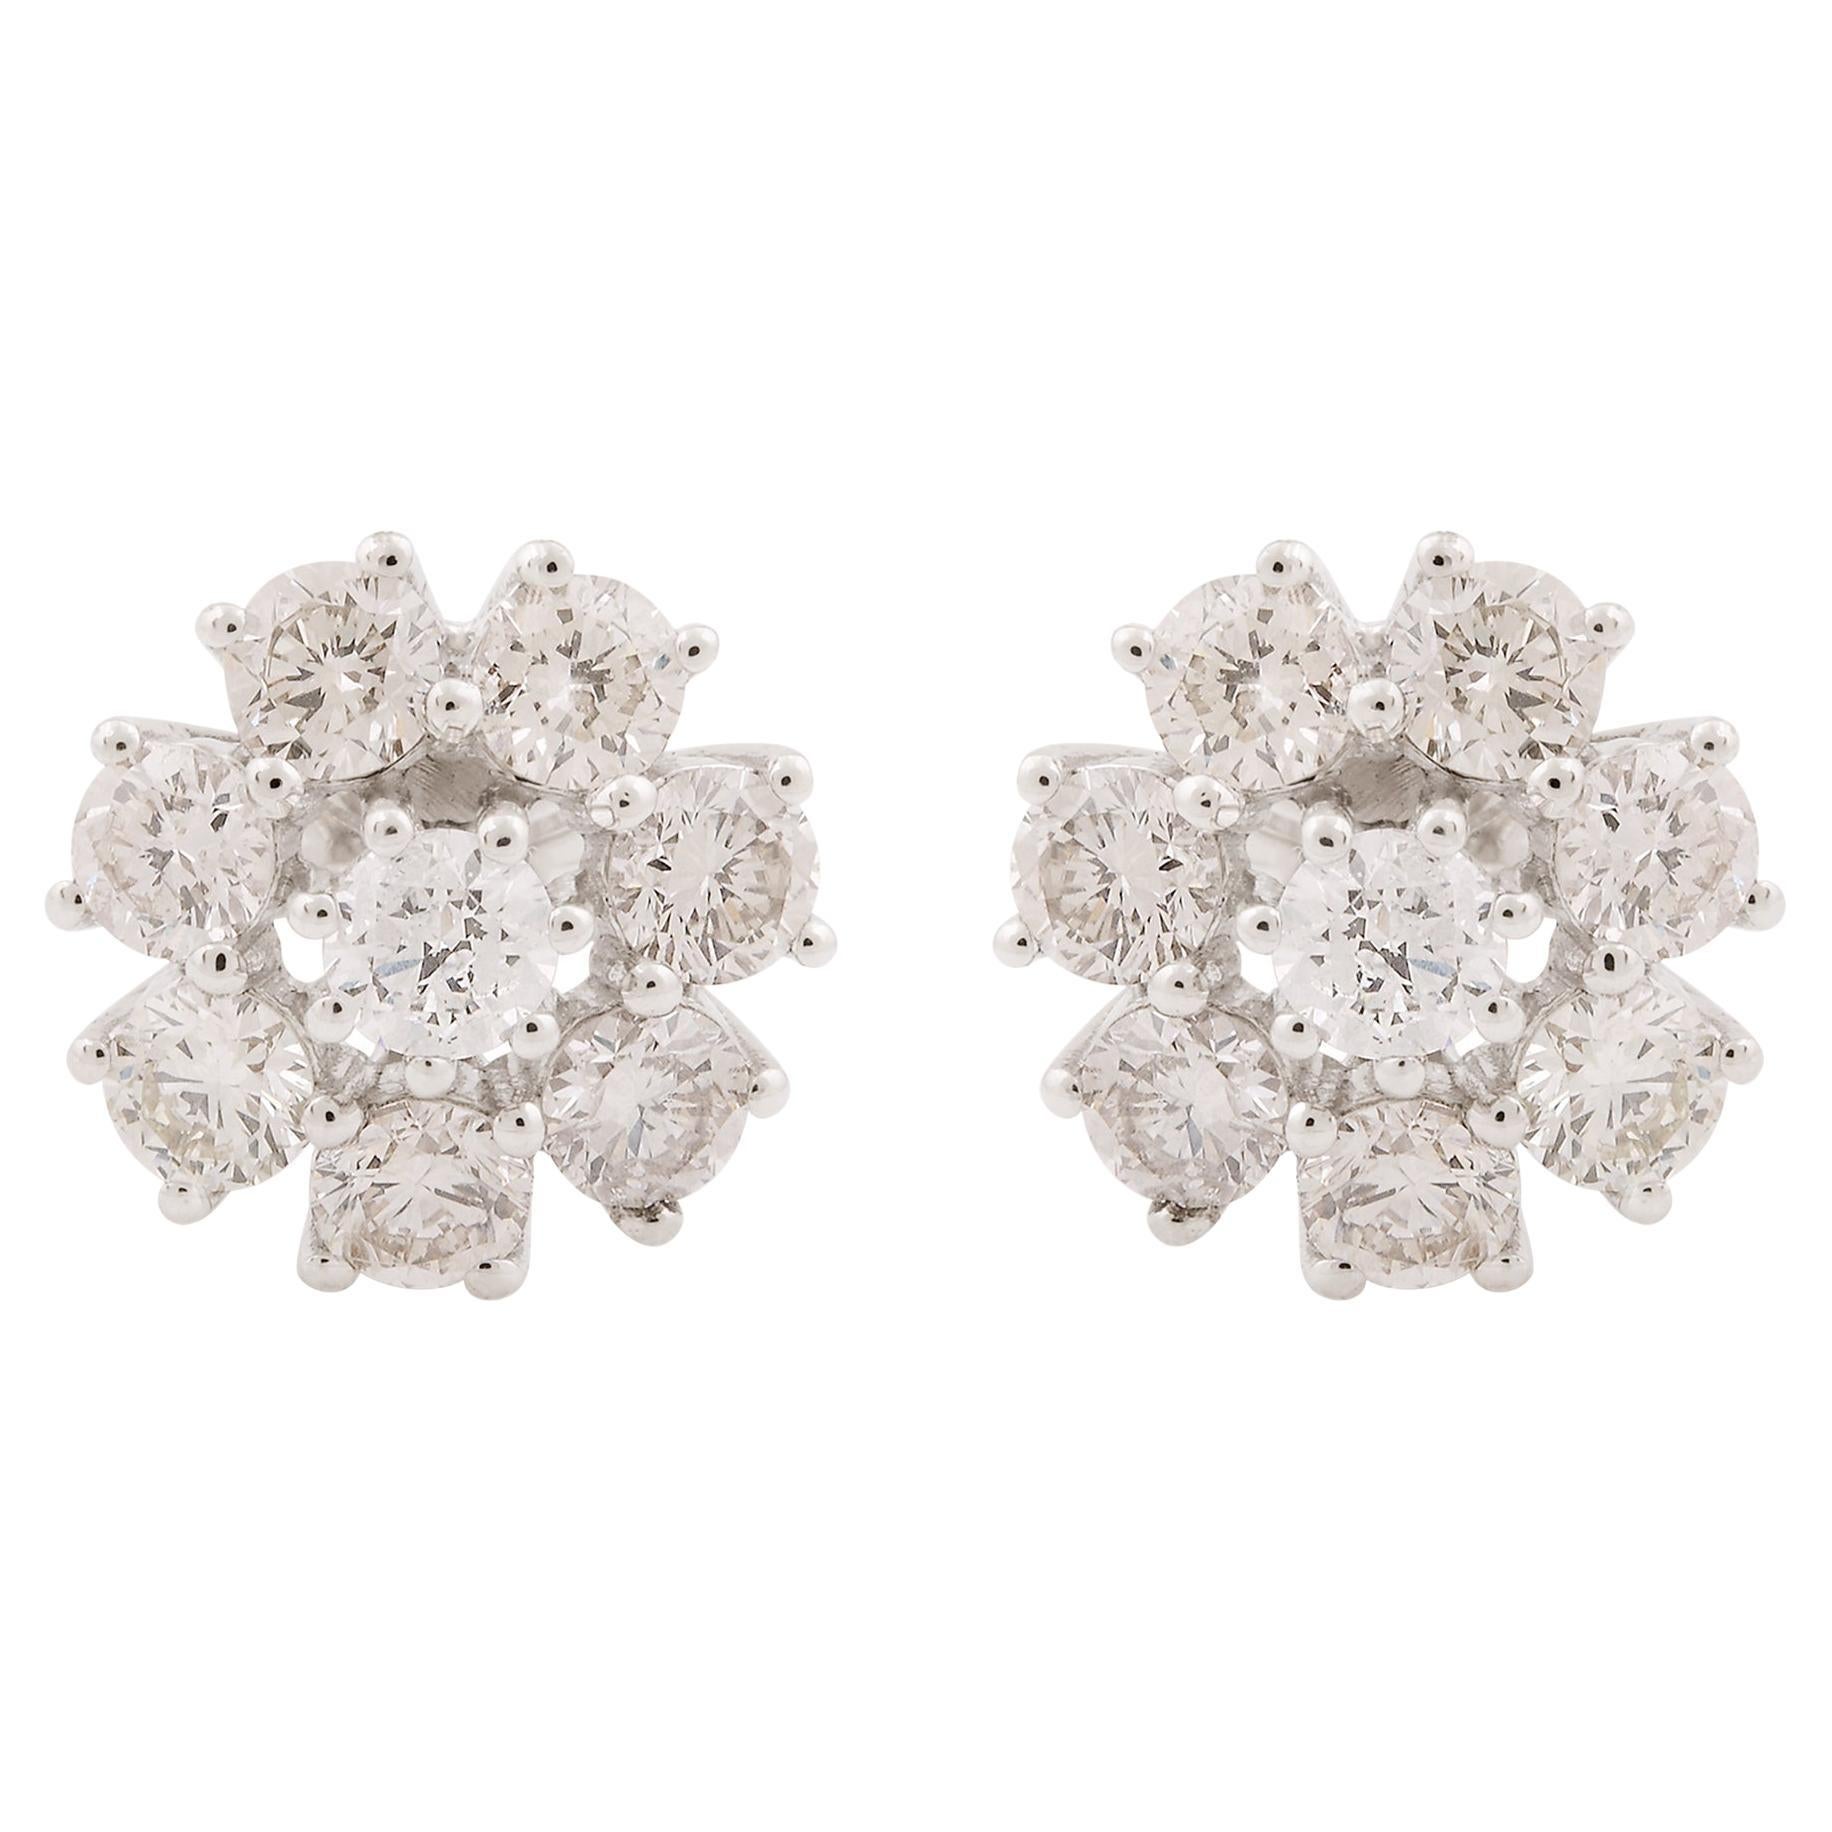 Real 1.83 Carat SI Clarity HI Color Diamond Floral Stud Earrings 14k White Gold